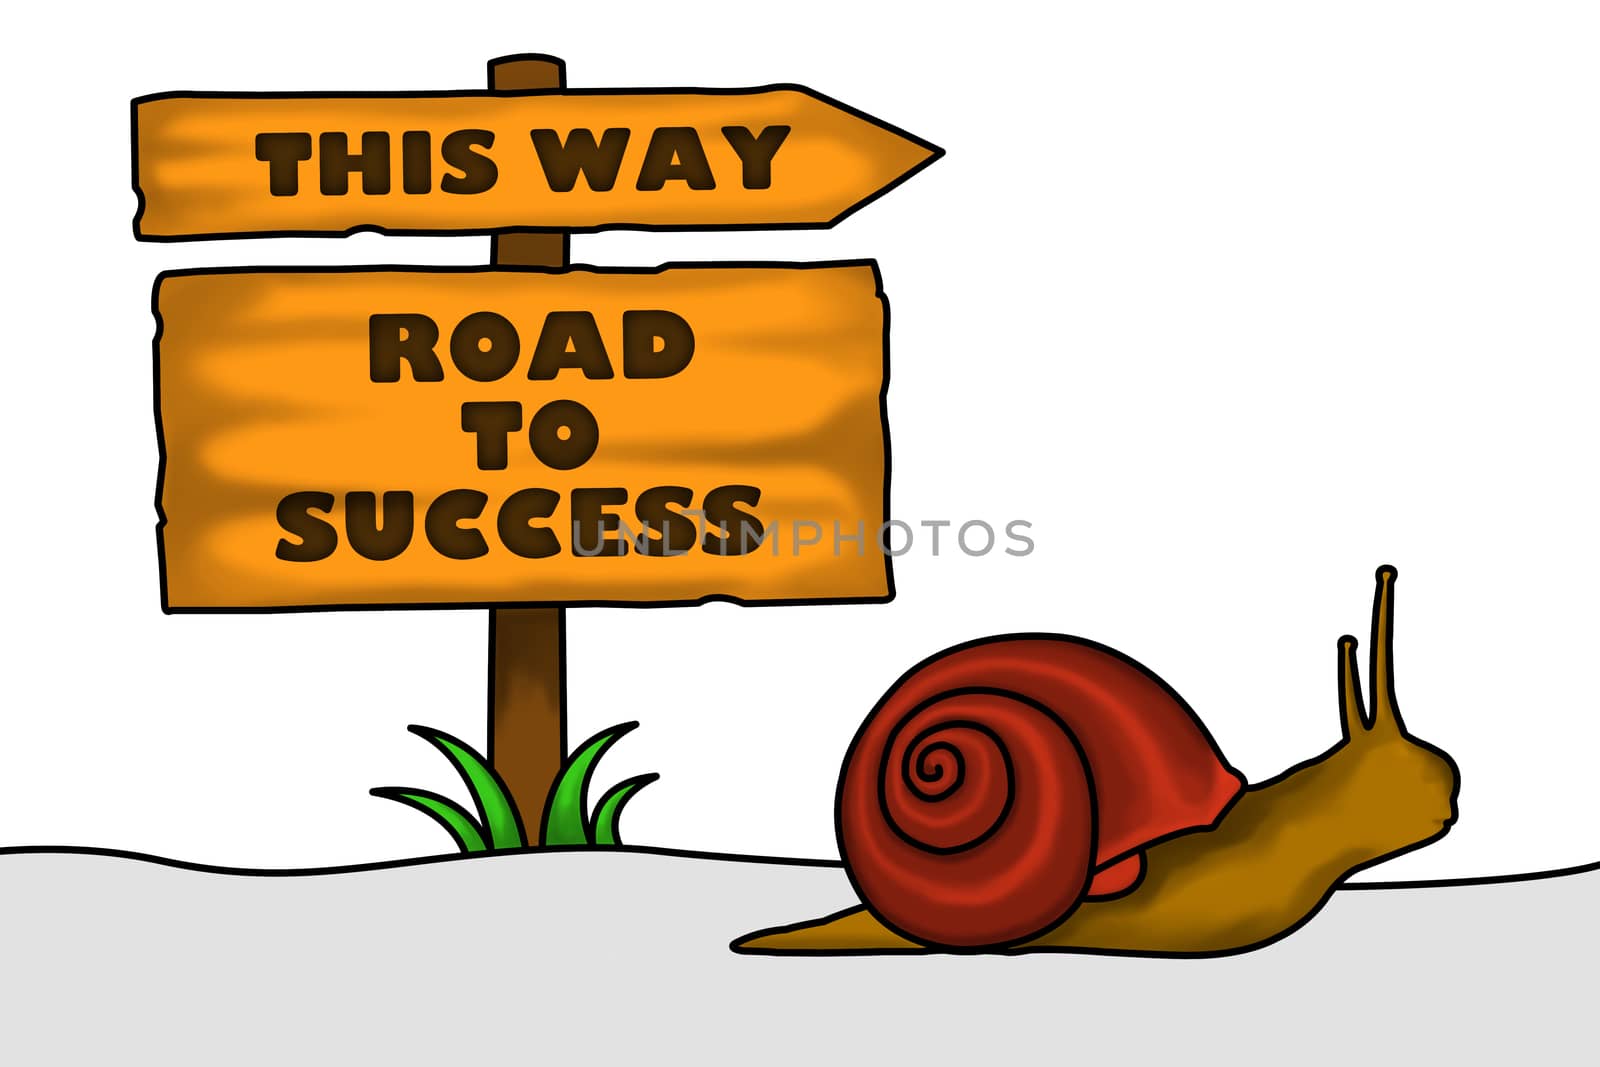 An illustration of a snail crawling heading towards success. A conceptual illustration about positive thinking of life despite of difficulties, to be diligent and persistent to reach your goal. To have a strong determination and perseverance to be successful.